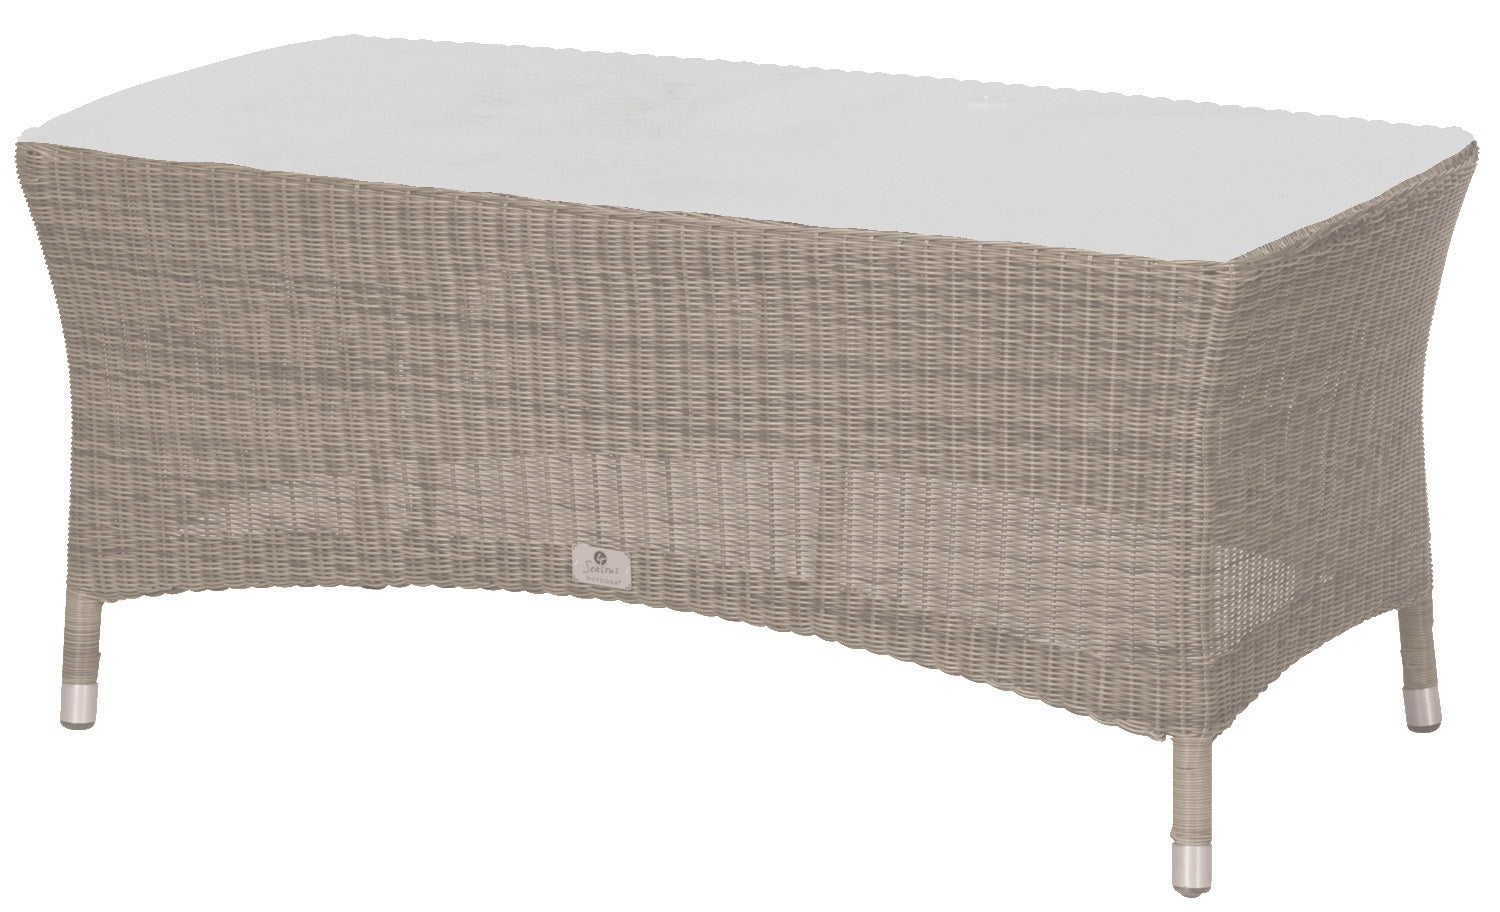 Sussex Outdoor Lounge Coffee Table by 4 Seasons Outdoor